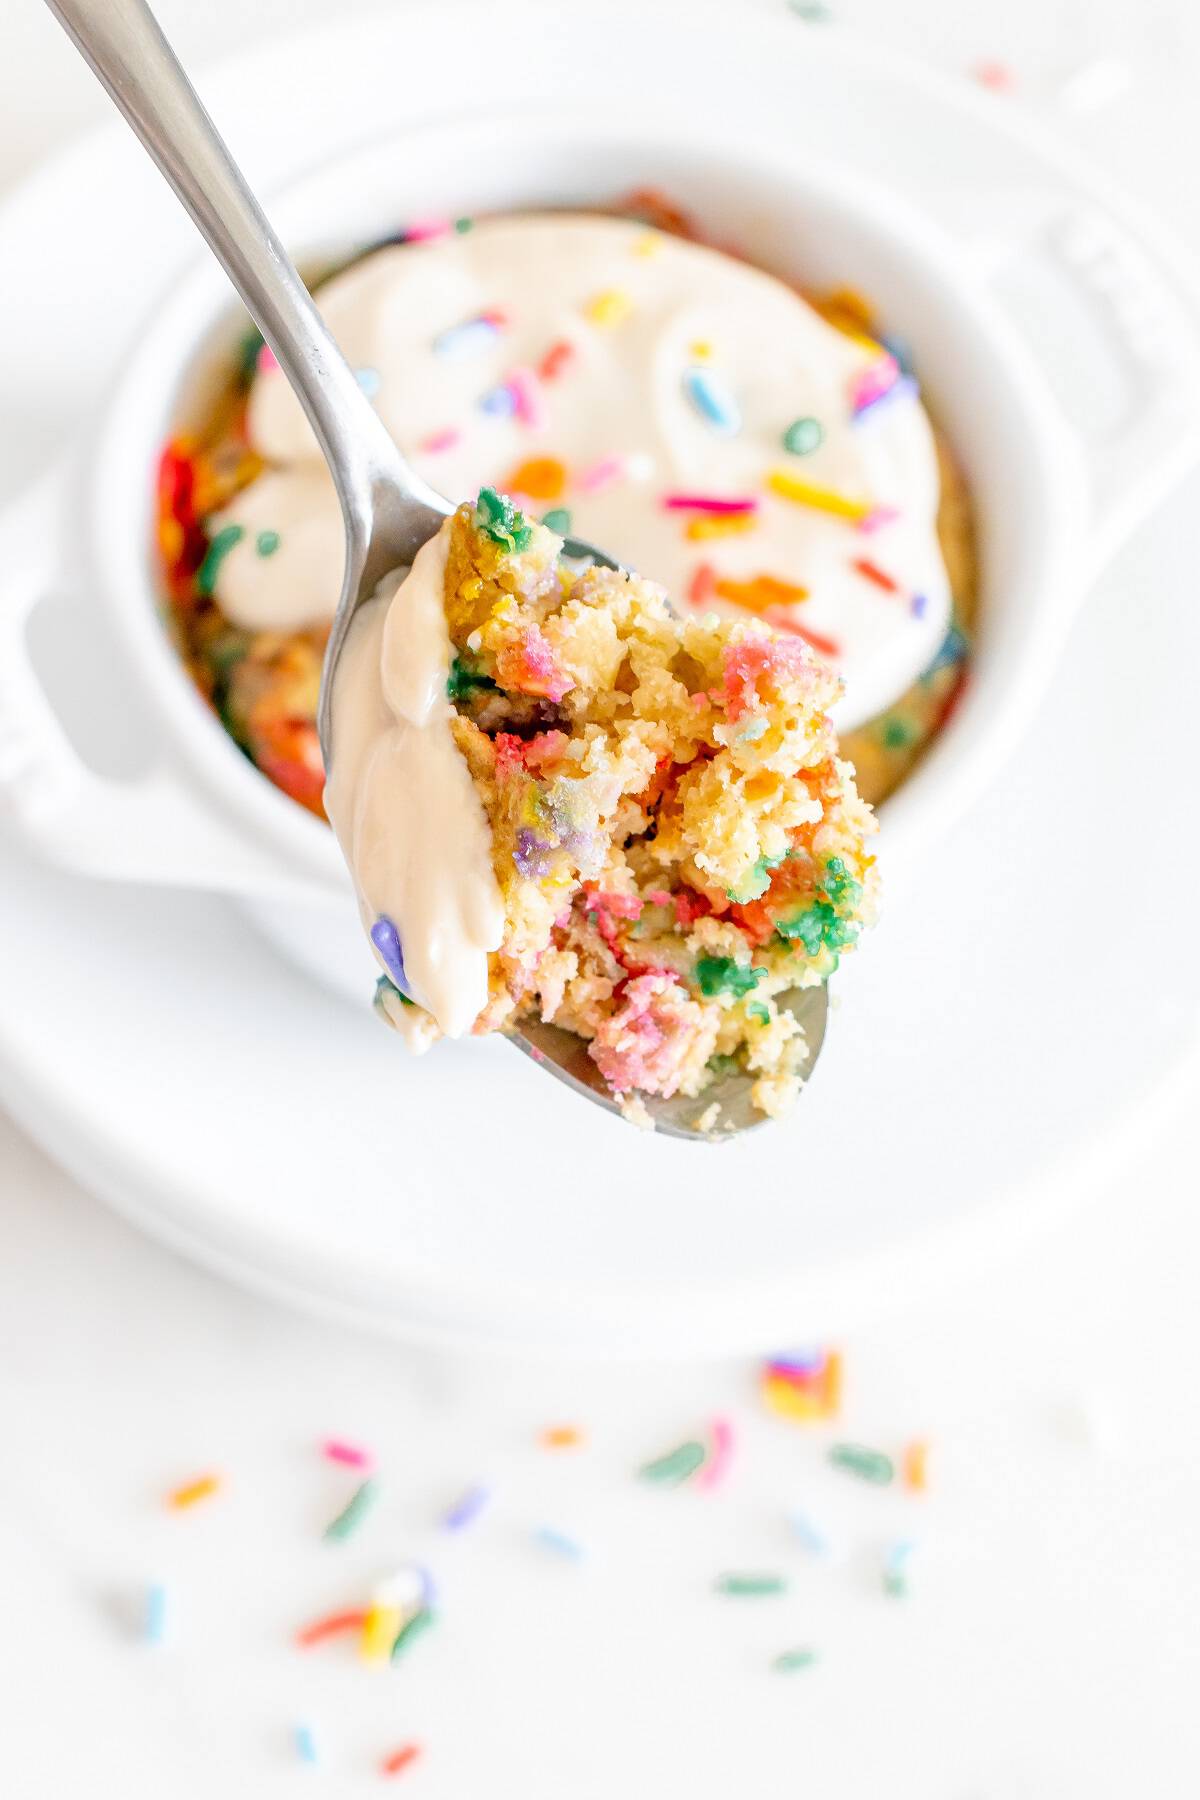 A close up of a spoonful of birthday cake baked oatmeal.